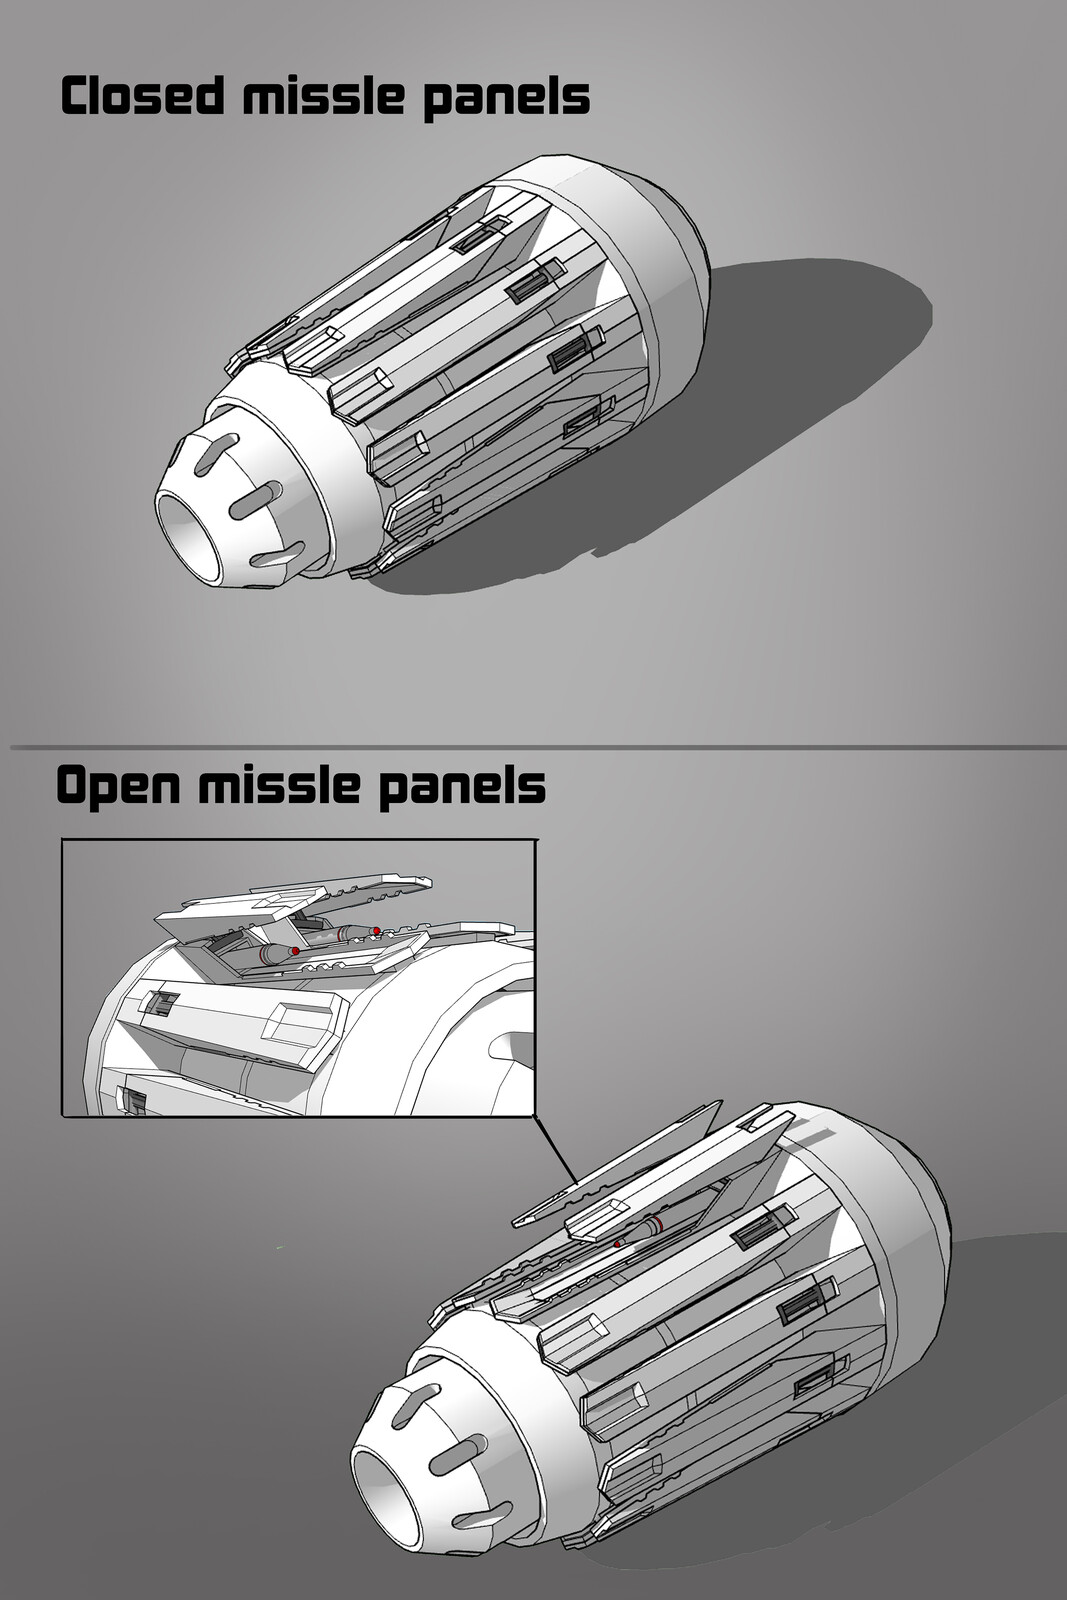 MegaMan's Buster Gun redesign.  The panels open to reveal a small missile.  